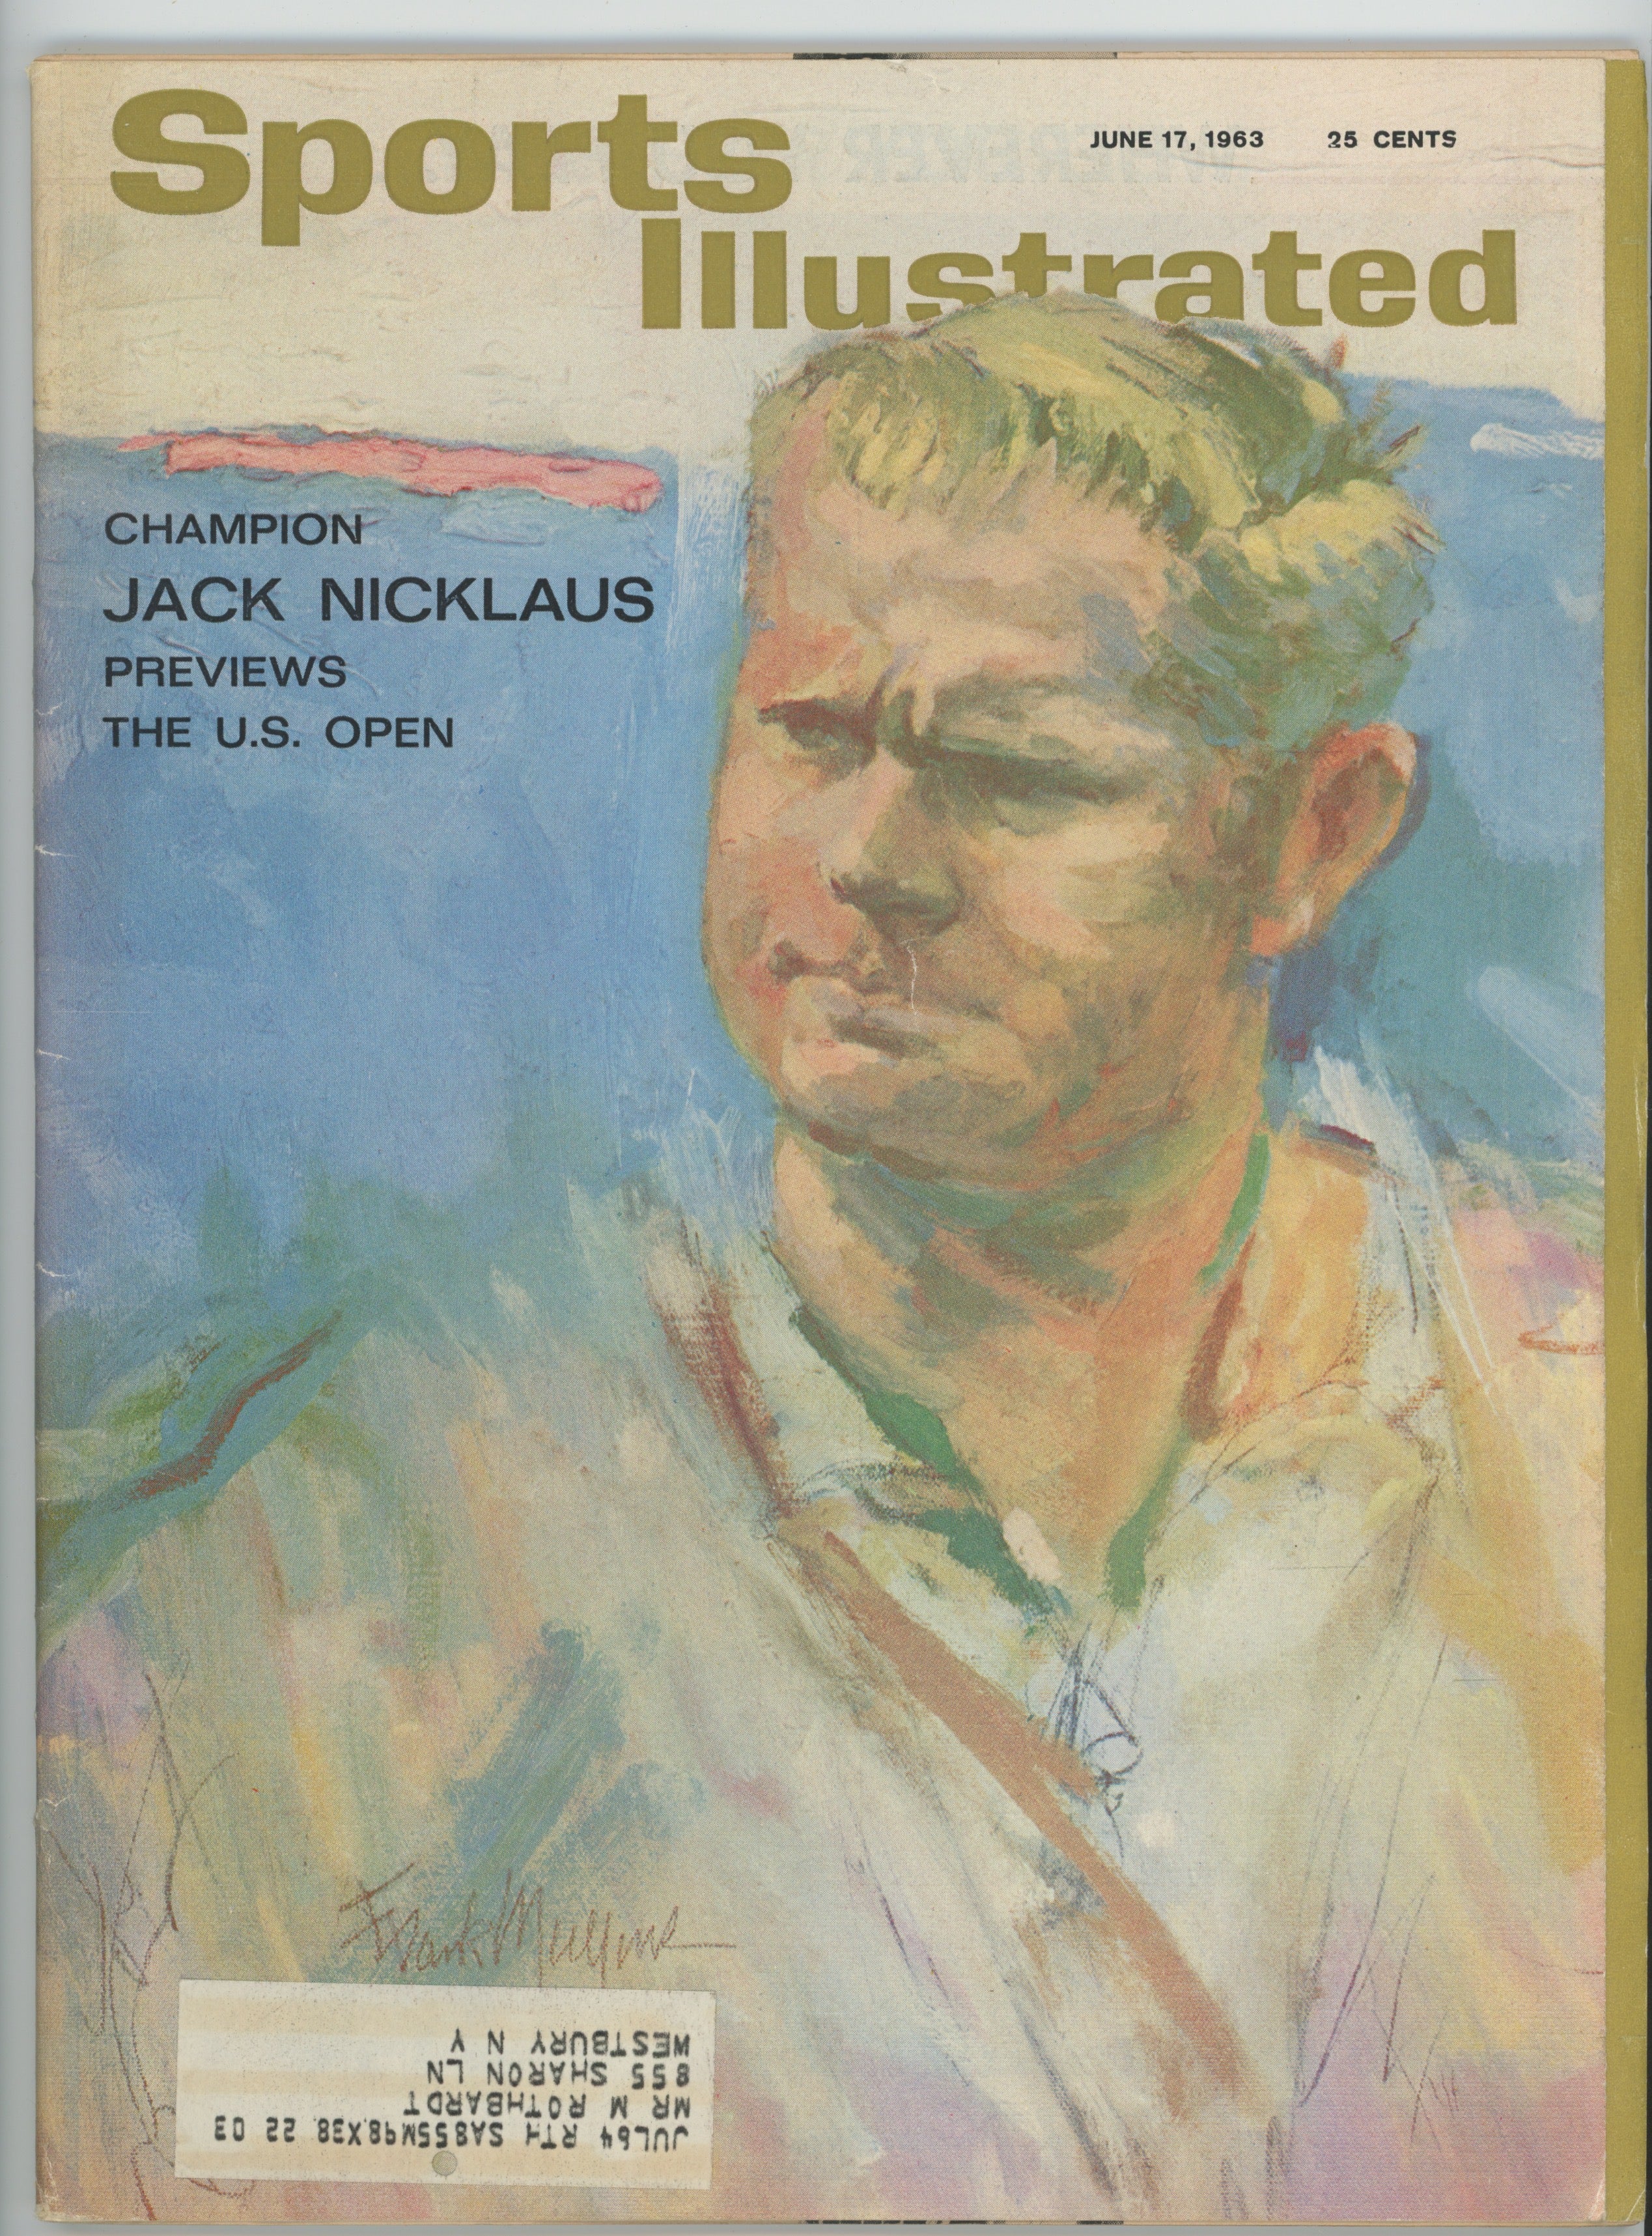 Jack Nicklaus “Champion Jack Nicklaus Previews the U.S. Open” 6/17/73 EX ML